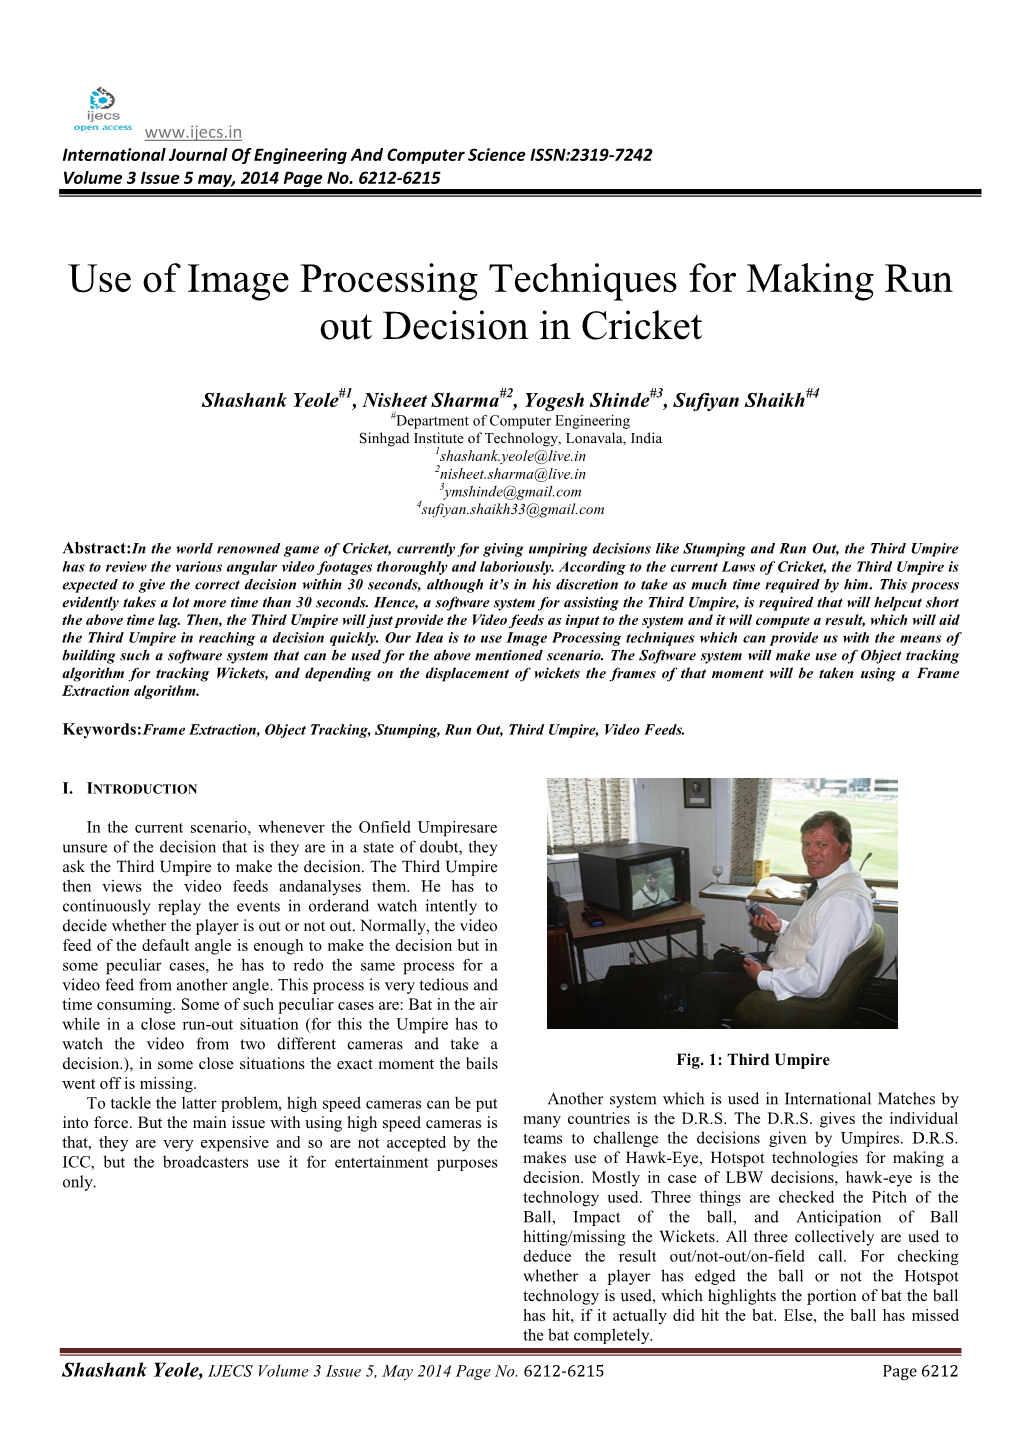 Use of Image Processing Techniques for Making Run out Decision in Cricket